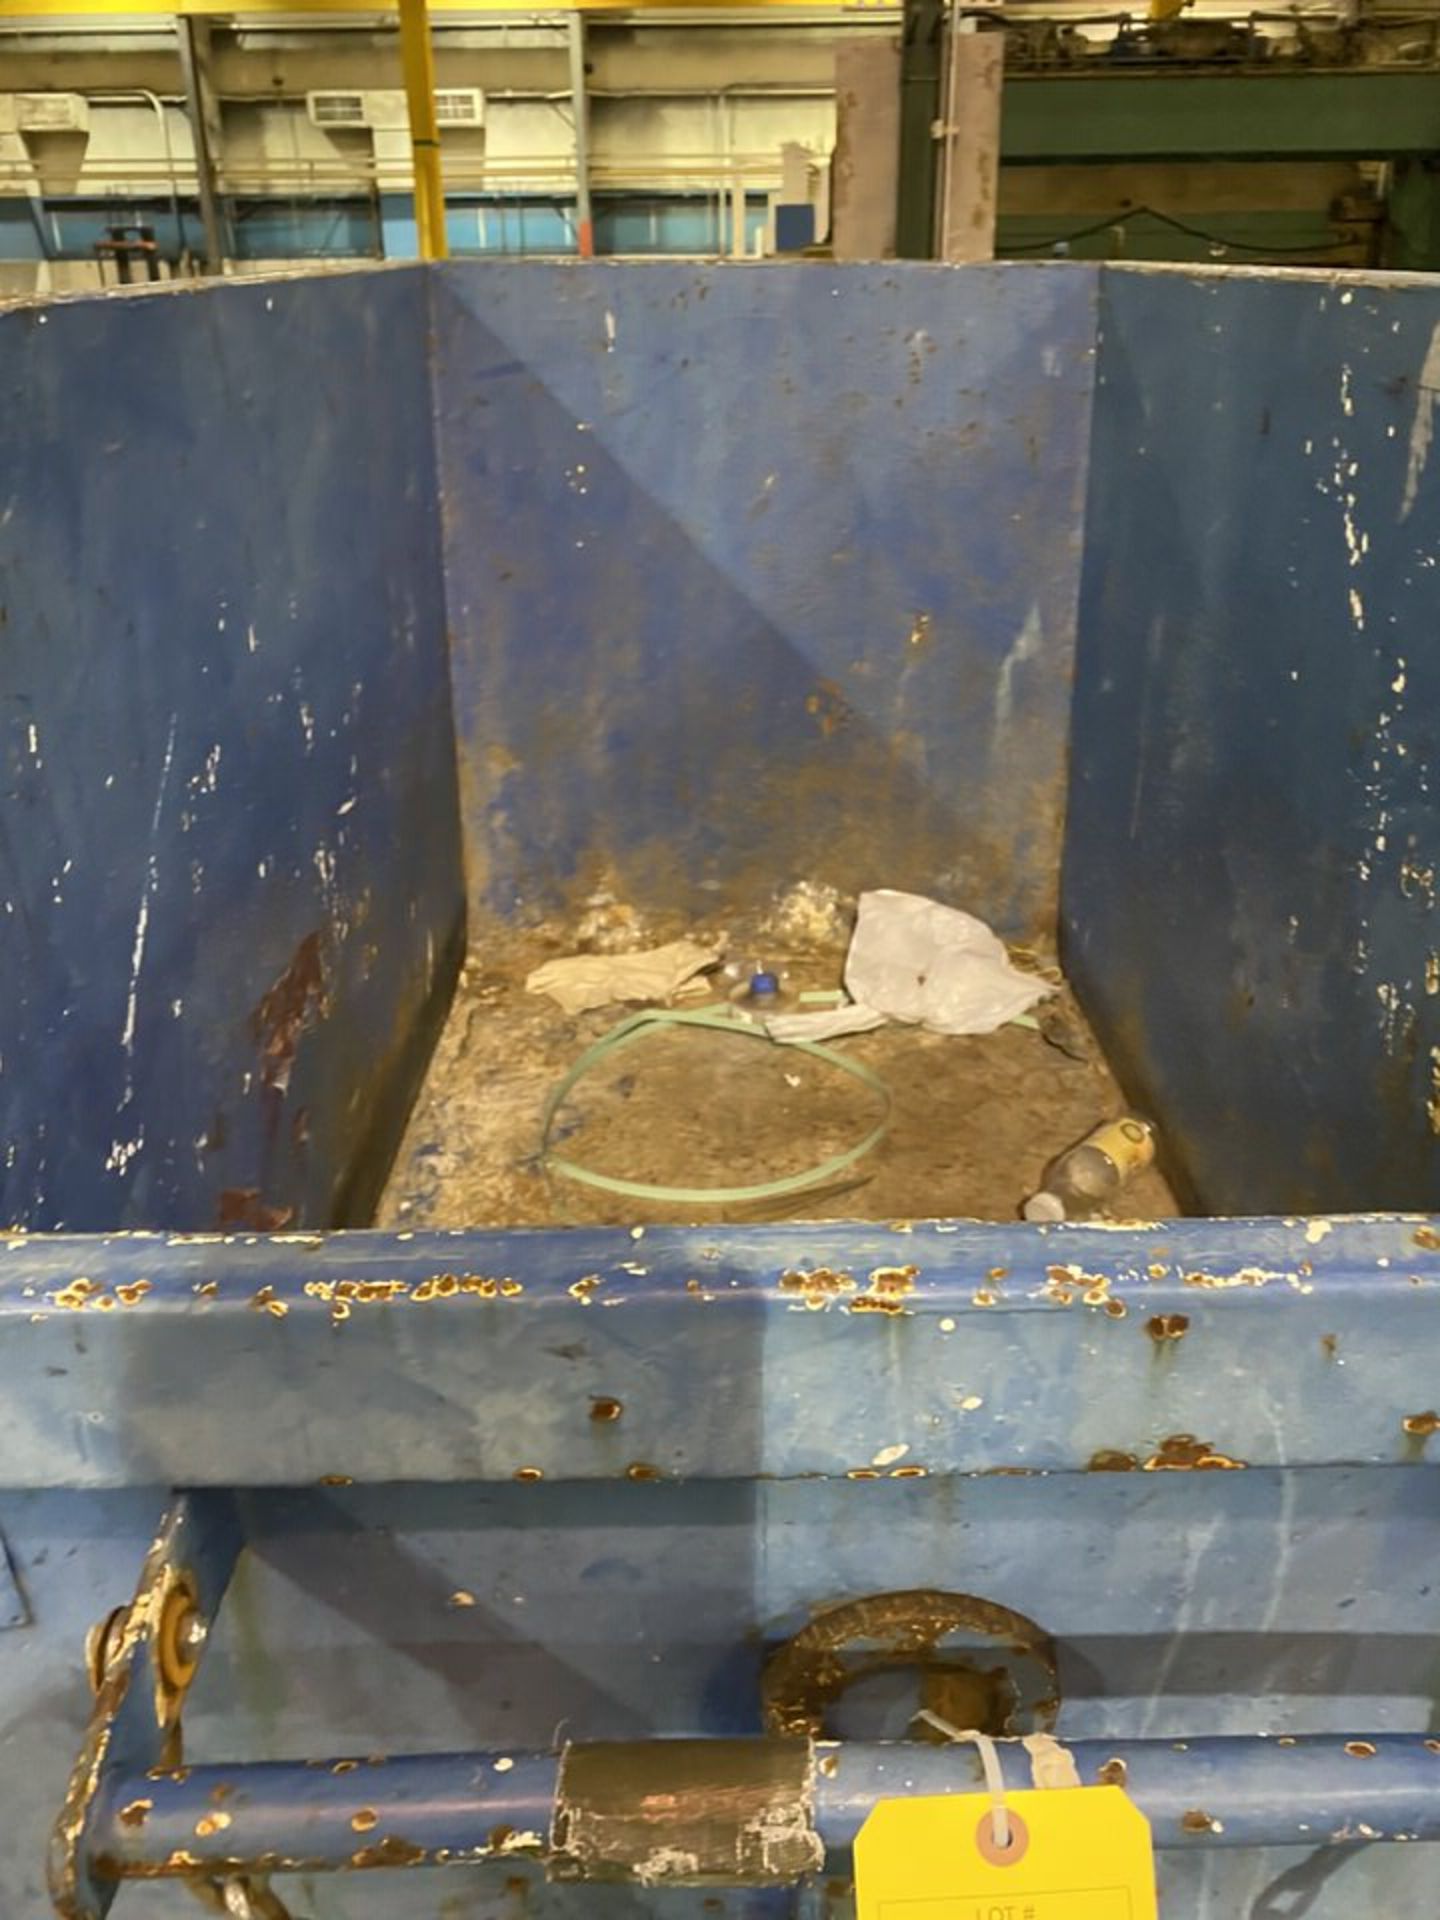 Blue Material Tug Cart on Casters (LOCATION: 1400 WESTPARK WAY, EULESS TX 75856) - Image 2 of 2